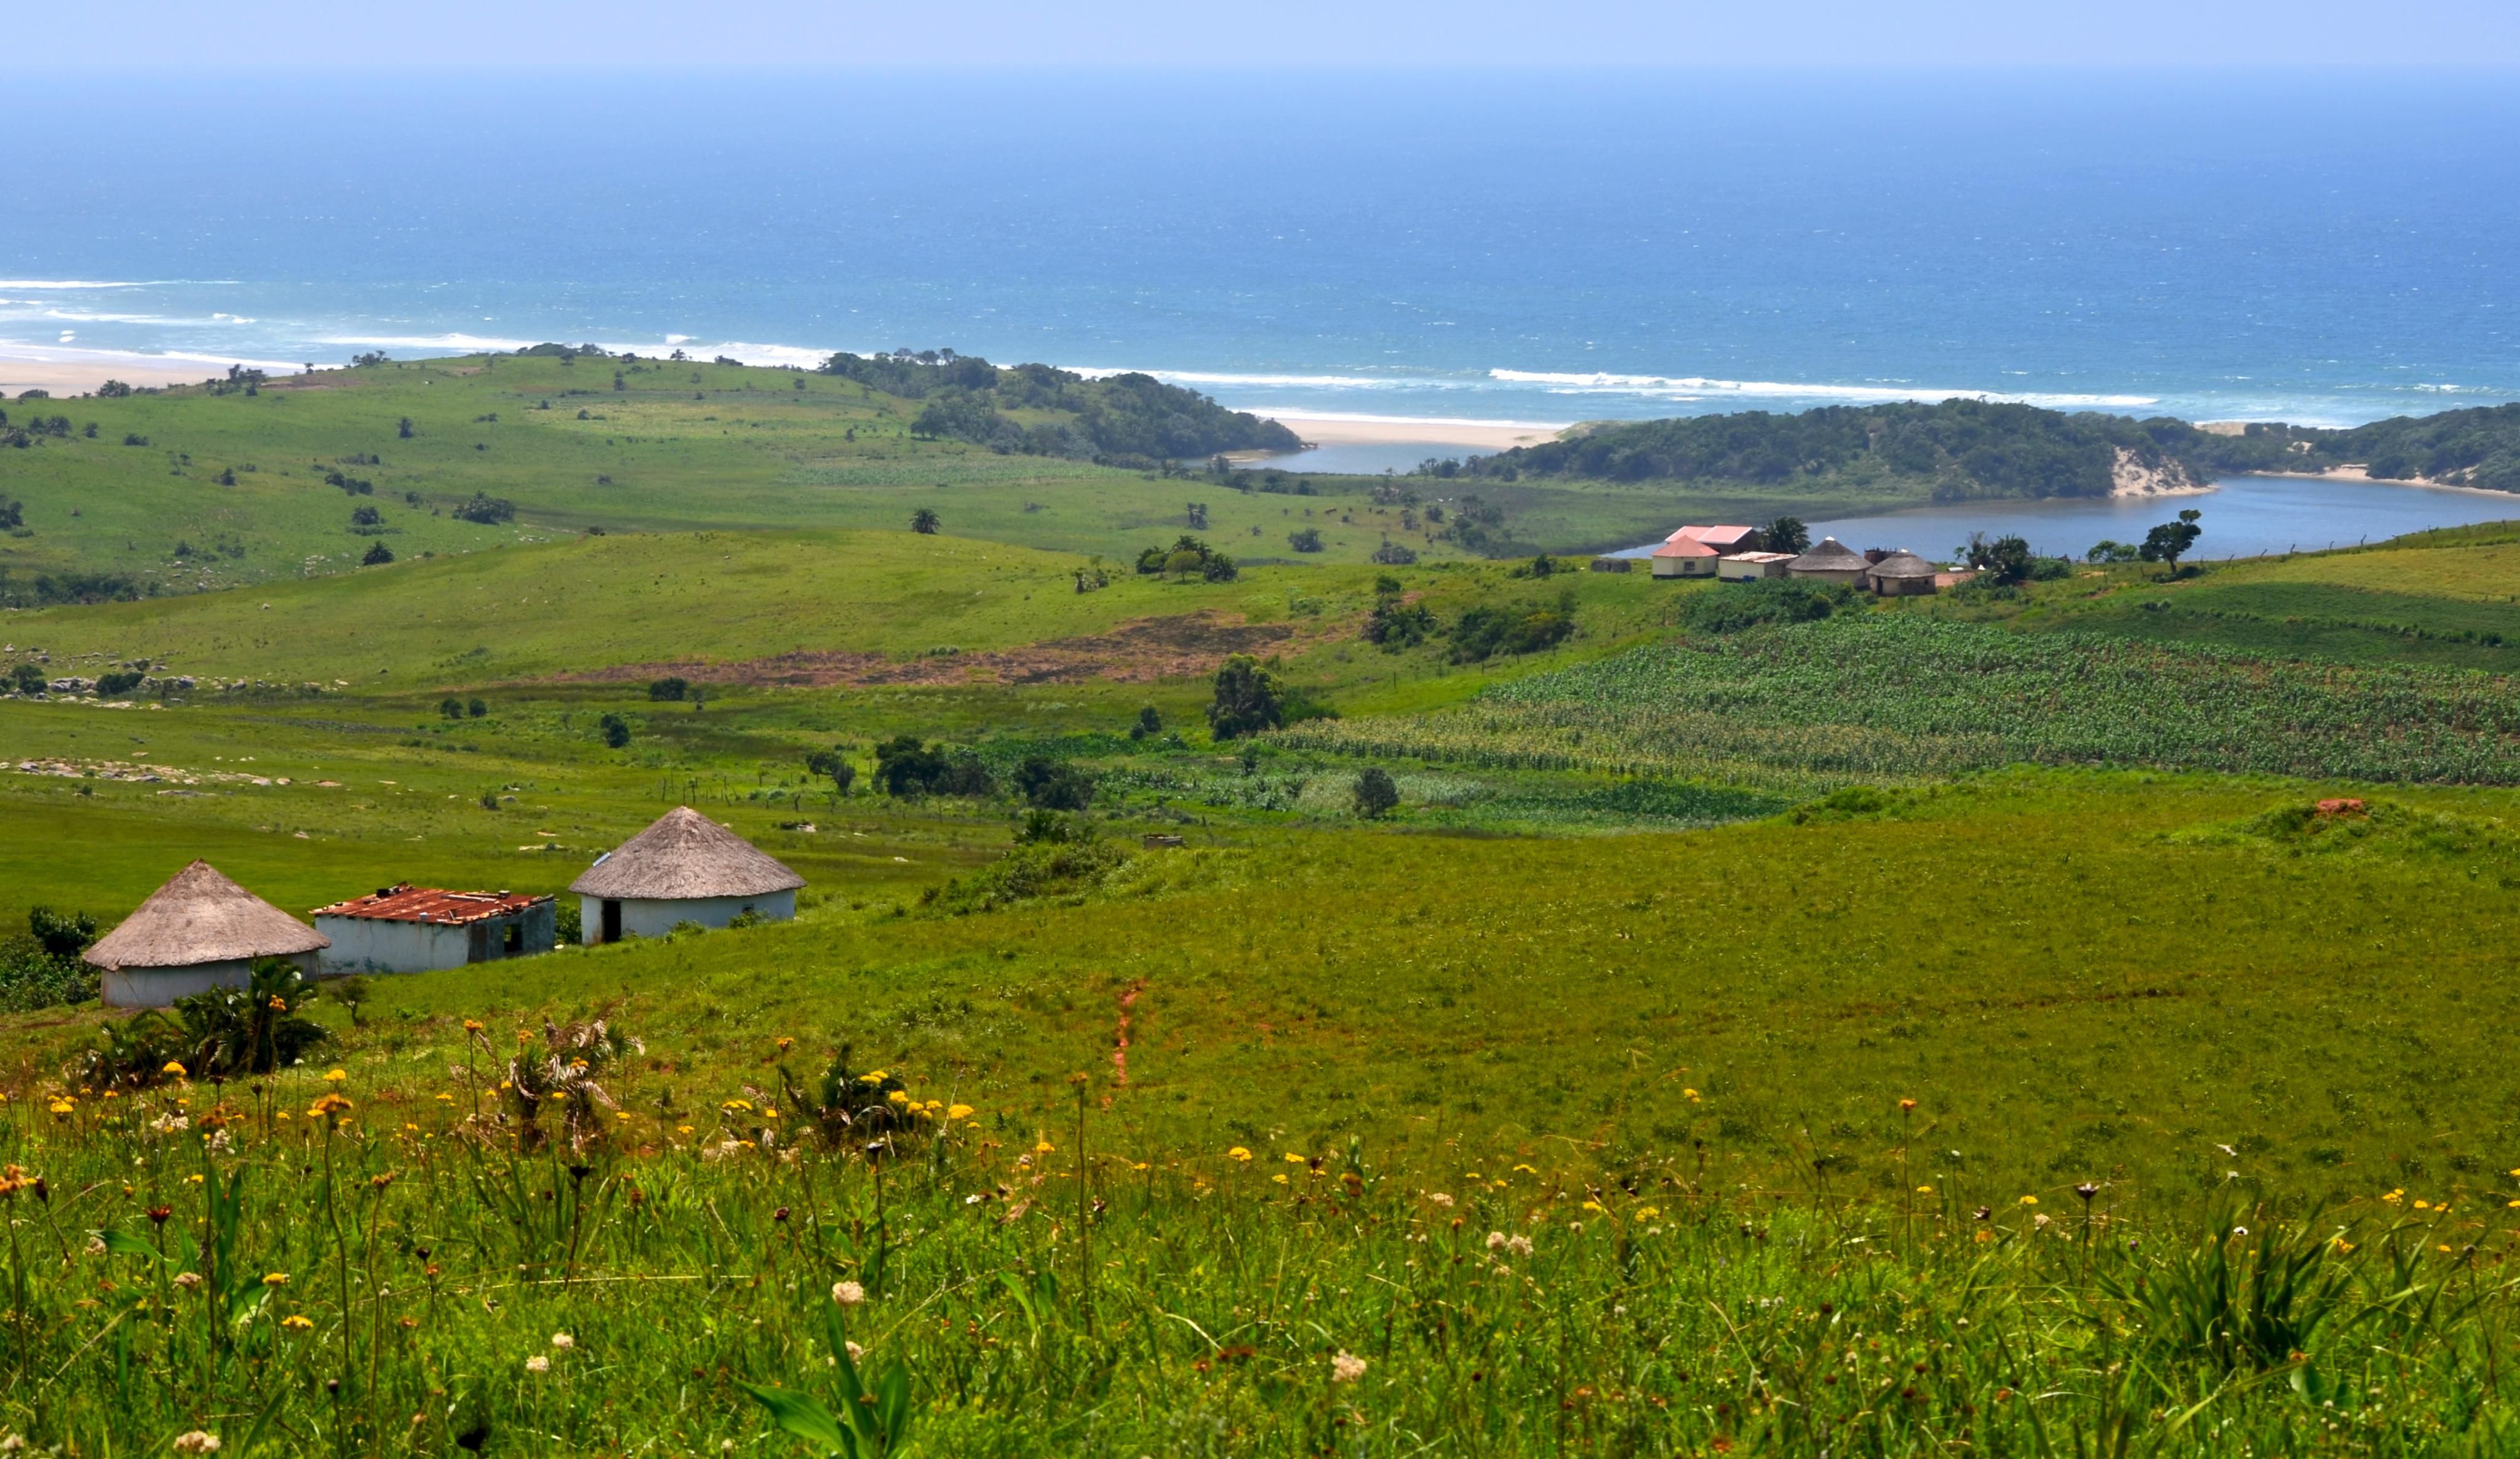 Homes and small agricultural plots dot the villages of Amadiba in South Africa's Eastern Cape province. Image by Mark Olalde. South Africa, 2017.